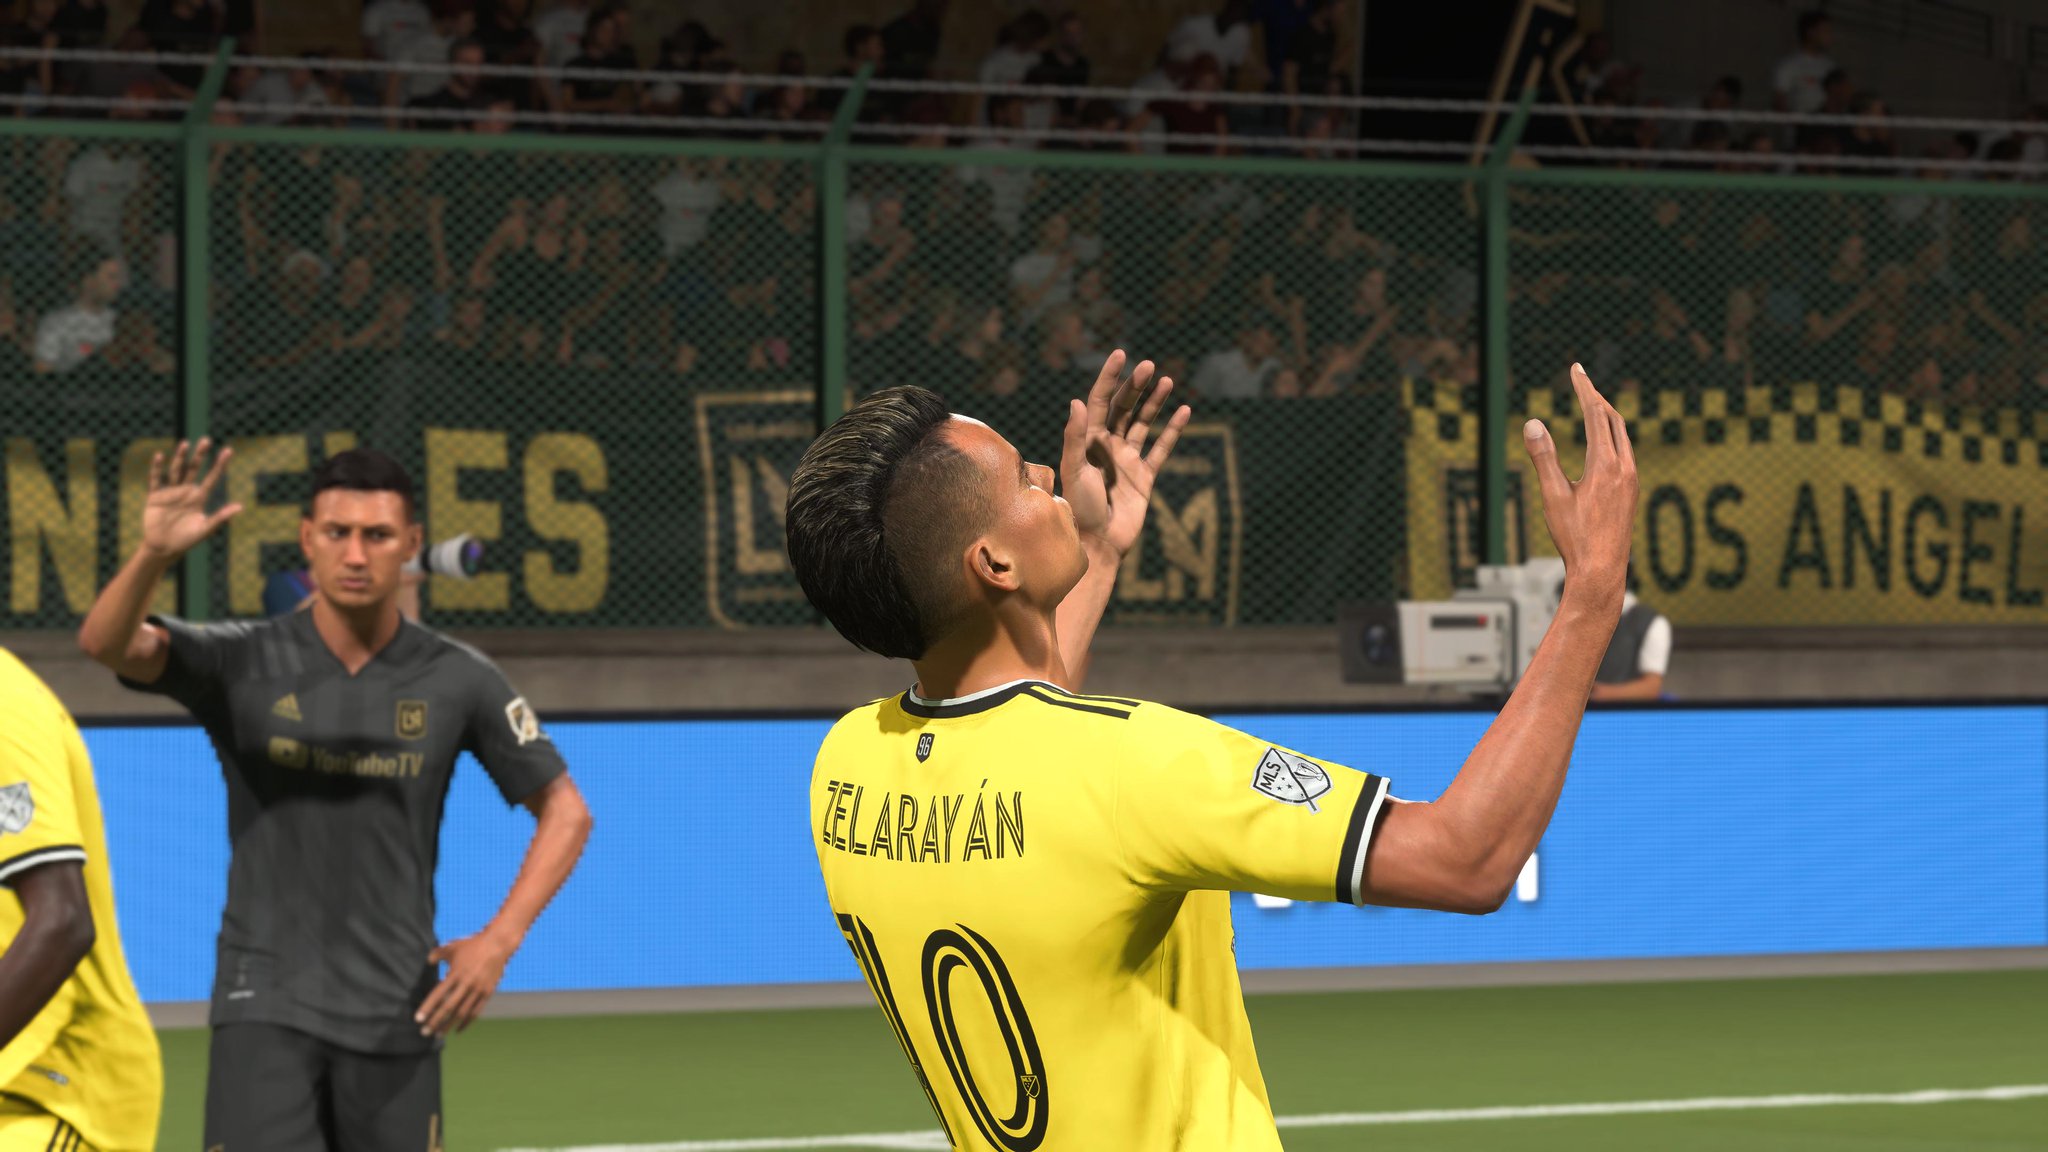 FIFA 21 Patch #12 Available Now on PC, Soon For Consoles - Patch Notes -  Operation Sports